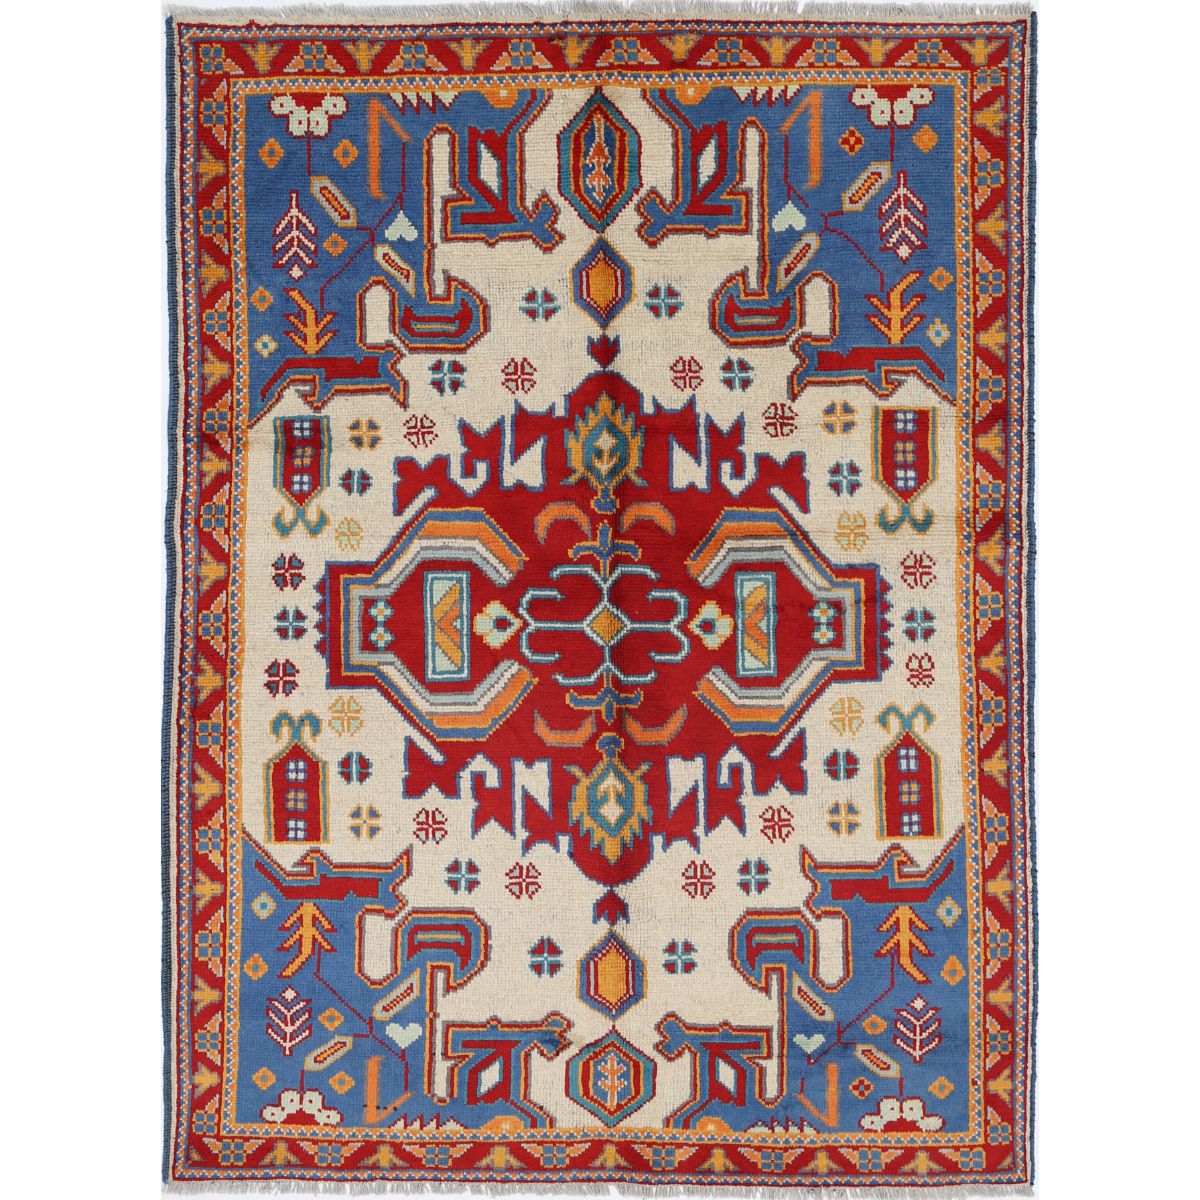 Revival 4' 9" X 6' 8" Wool Hand Knotted Rug